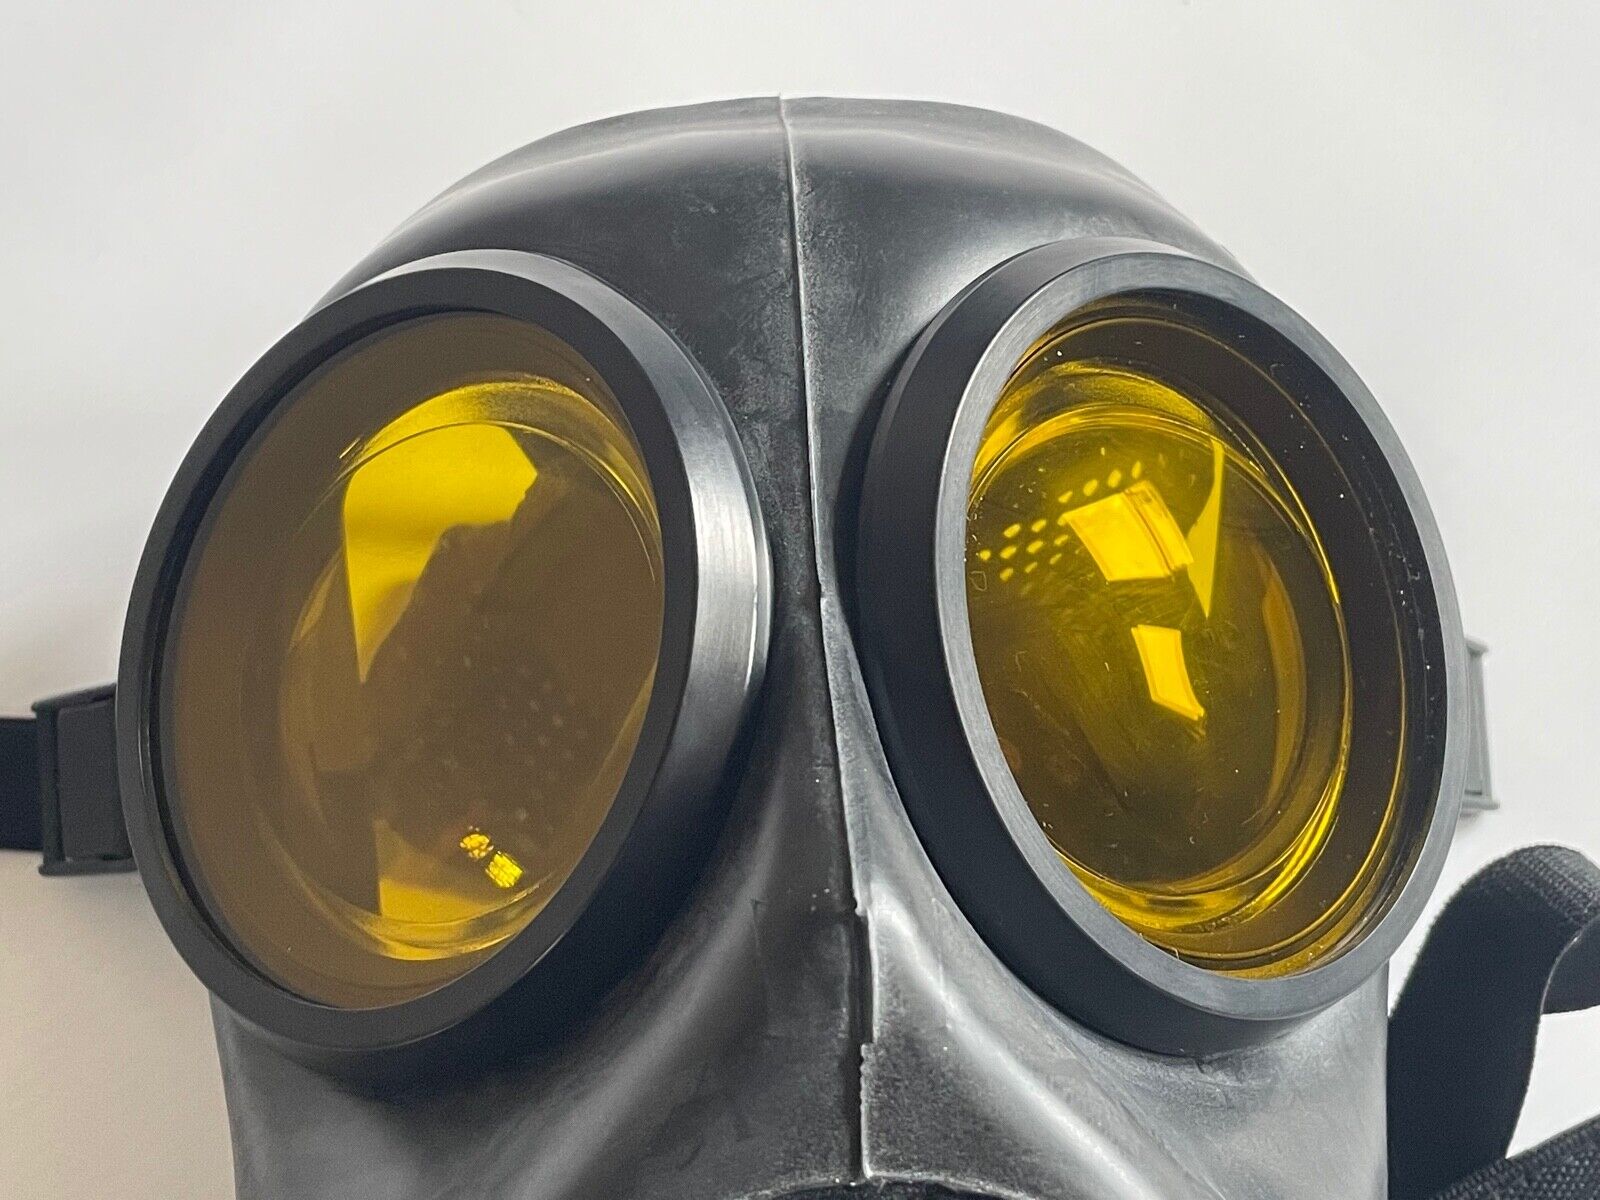 FM12 GAS MASK OUTSERTS GENUINE  YELLOW RUBBER LENSES (GAS MASK NOT INCLUDED) 